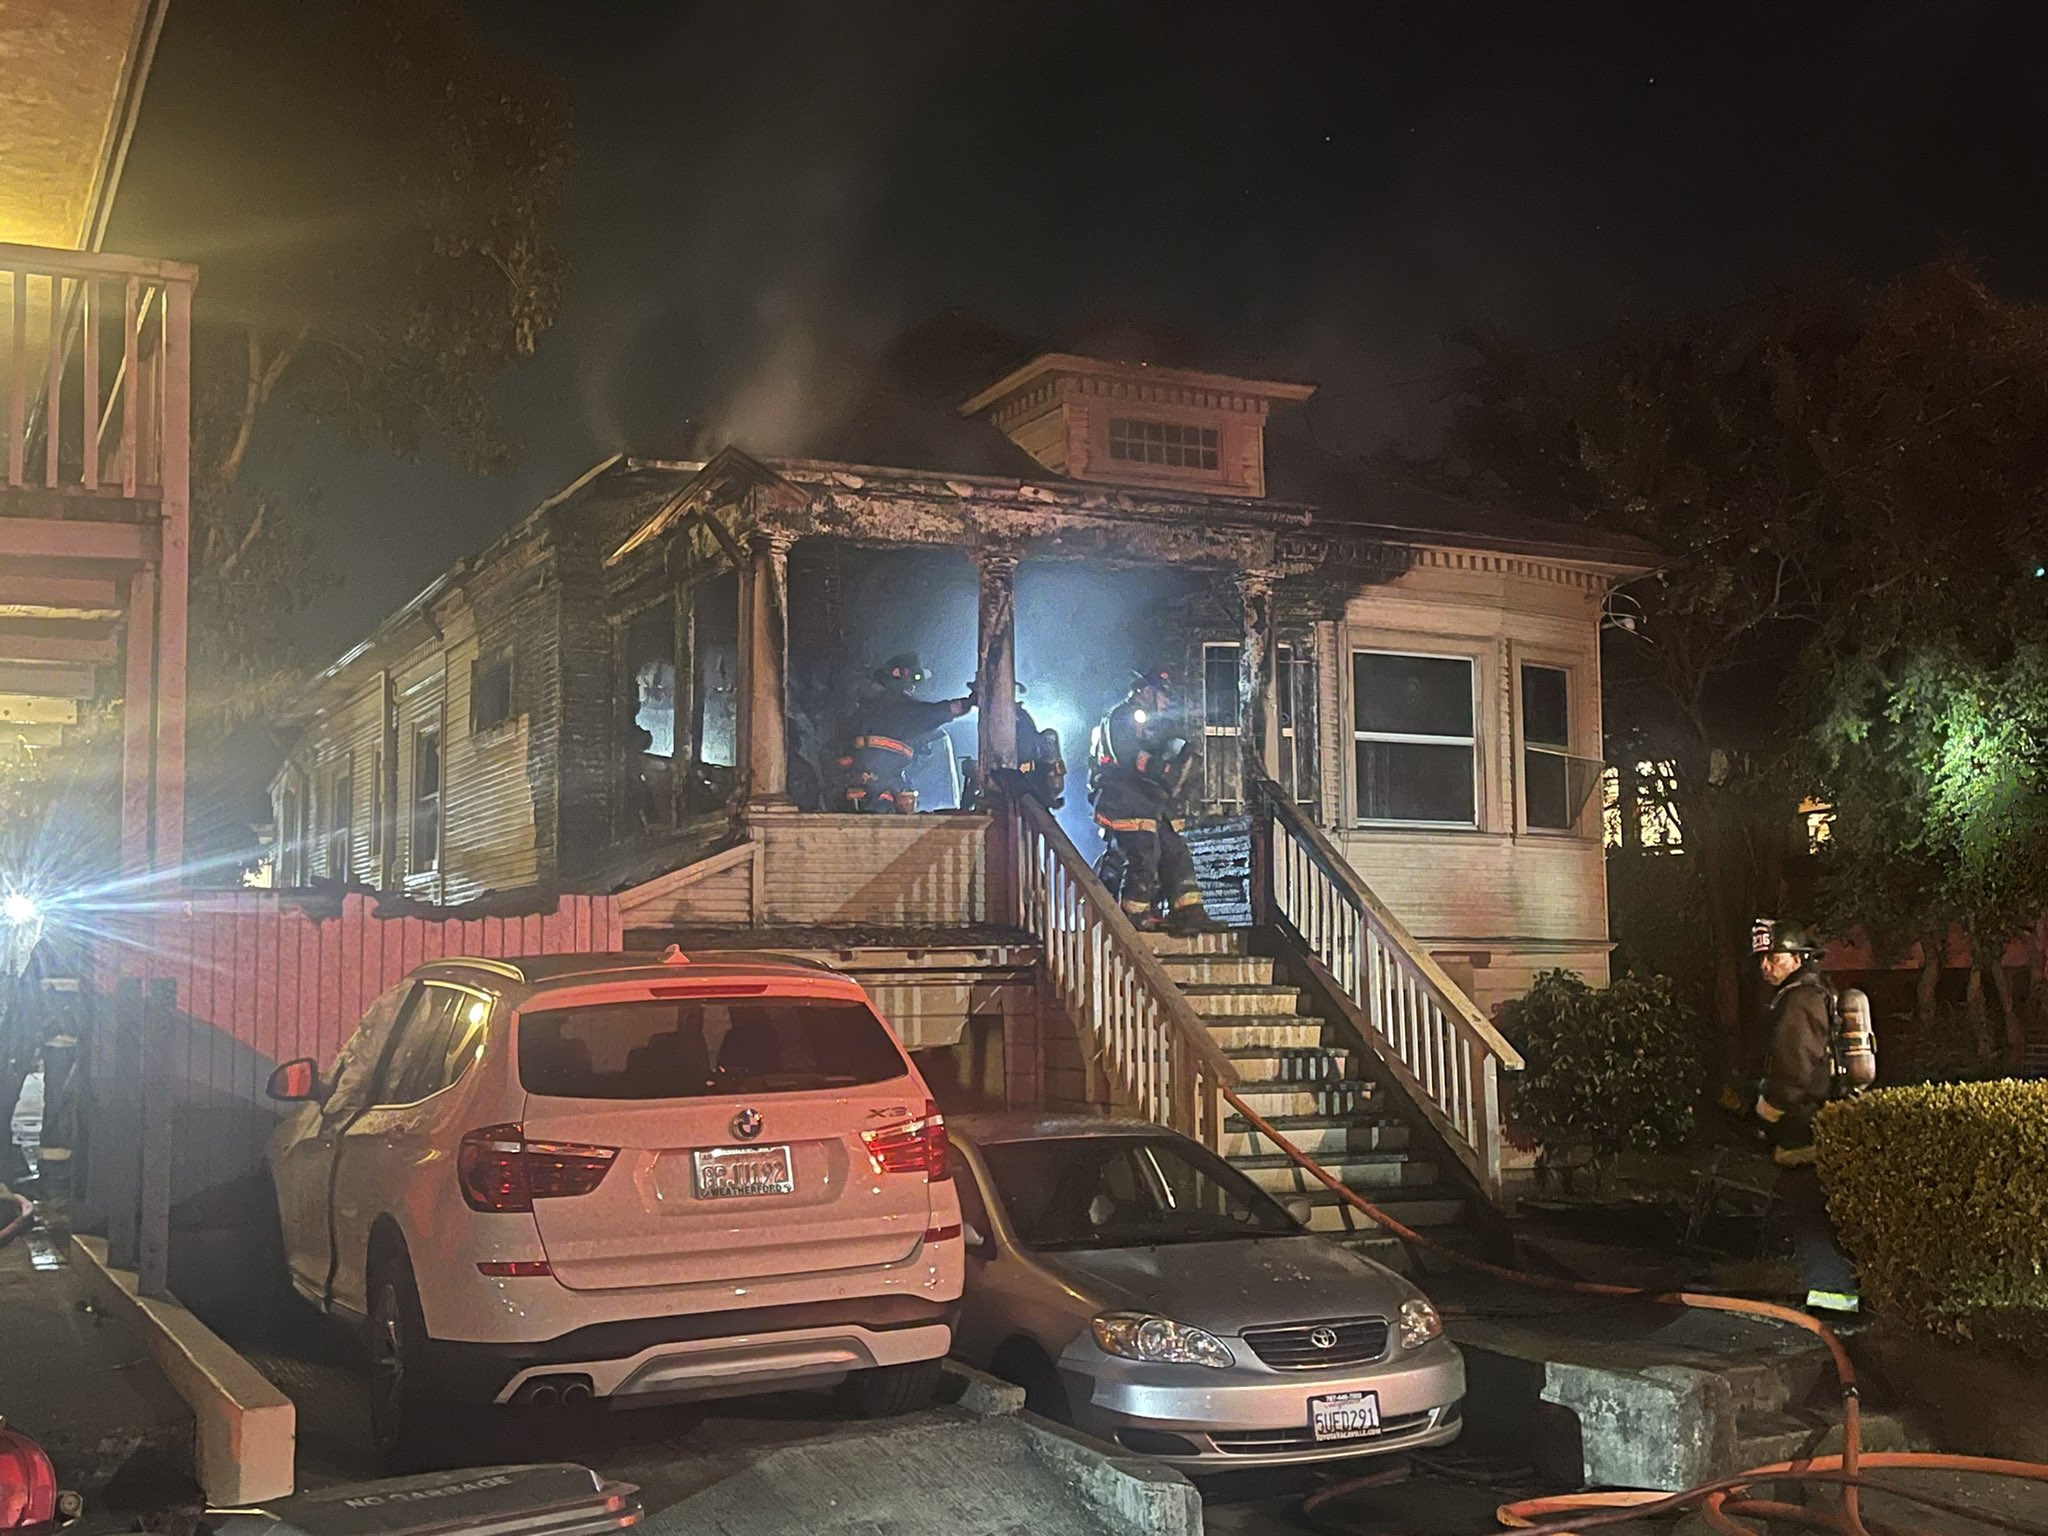 code negatief Boost Oakland Firefighters on Twitter: "600 block Alcatraz- crews on acne working  a fire in a single family residence. #avoid the area. Engines 8, 19, 5, 15,  Truck 5, Battalion 2. . #oakland https://t.co/eNtcEfjUpC" / Twitter